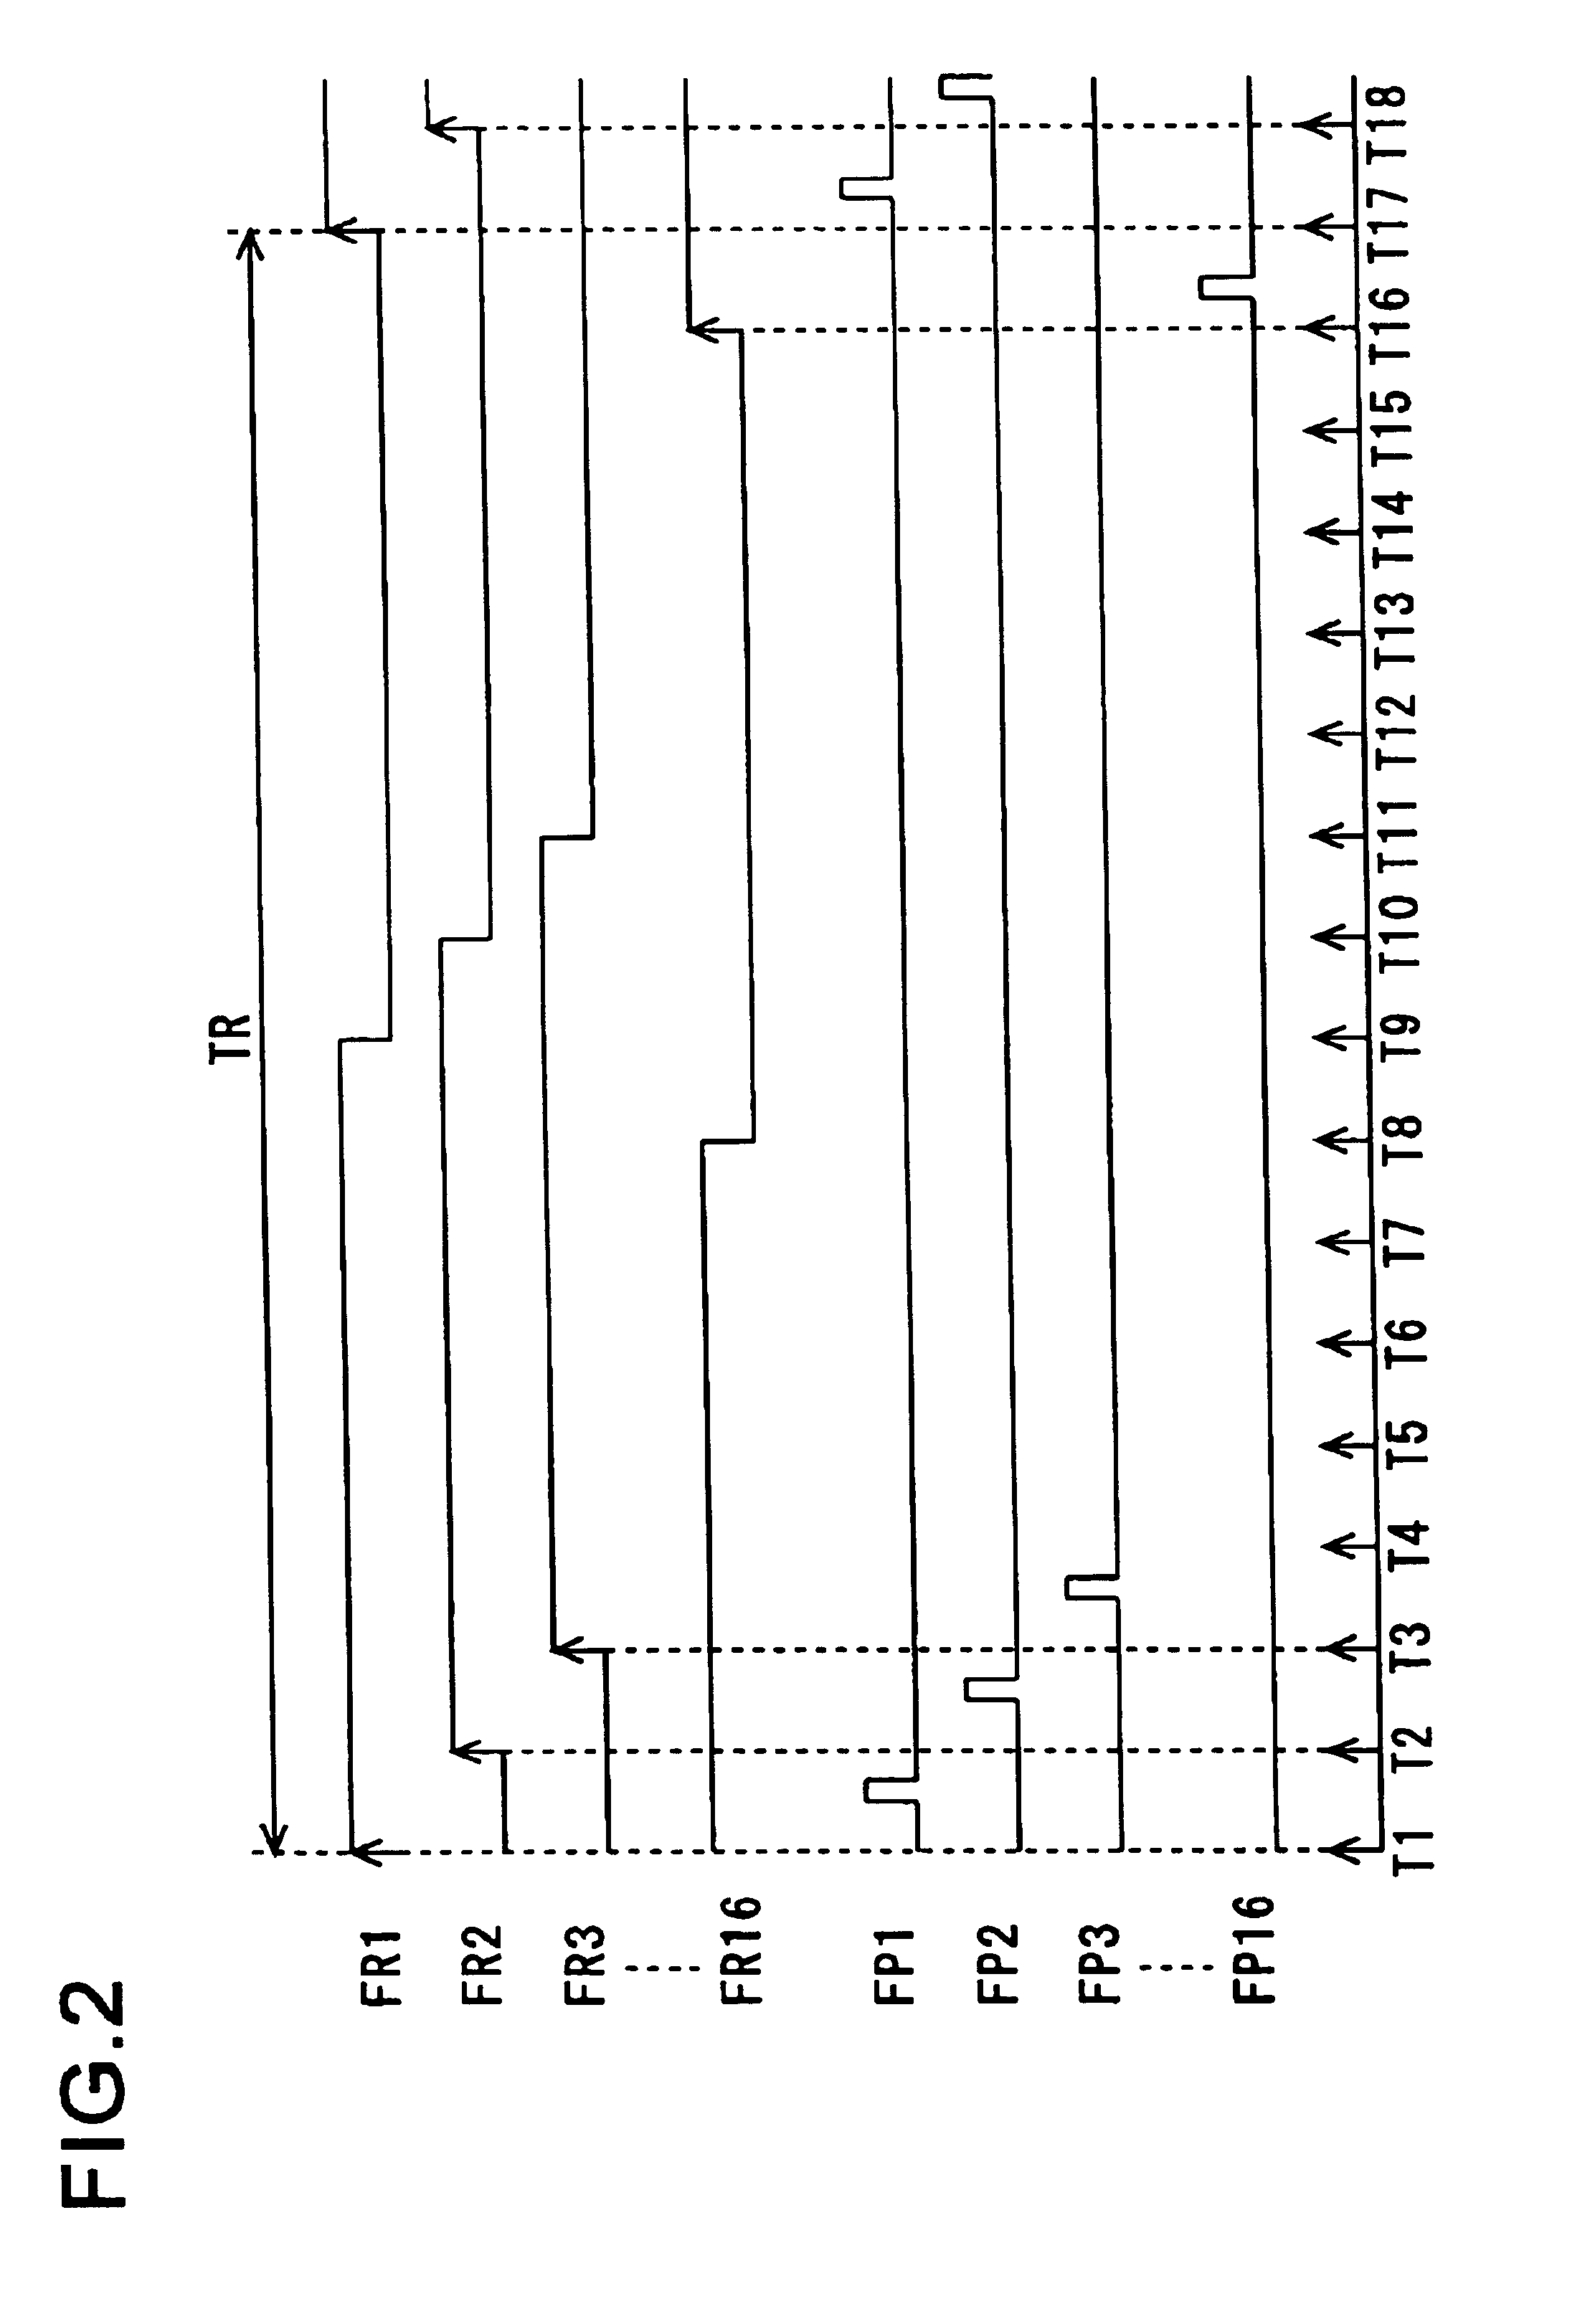 Phase locked loop circuit with selectable variable frequency dividers